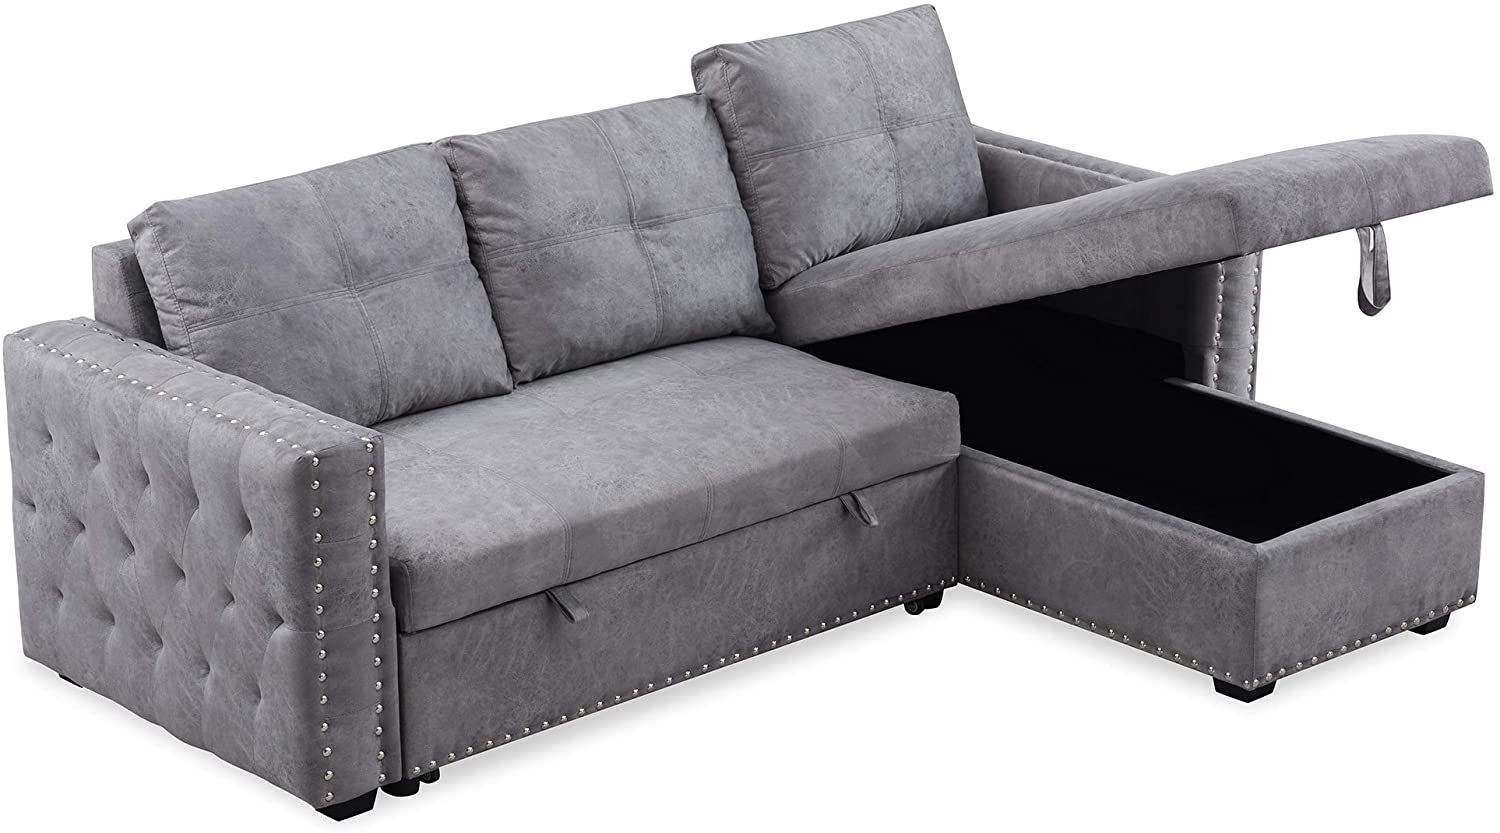 Wholesale 91" Reversible Sleeper Sectional Sofa 3 Seat With Nail Head With 3 In 1 Gray Pull Out Sleeper Sofas (Gallery 11 of 20)